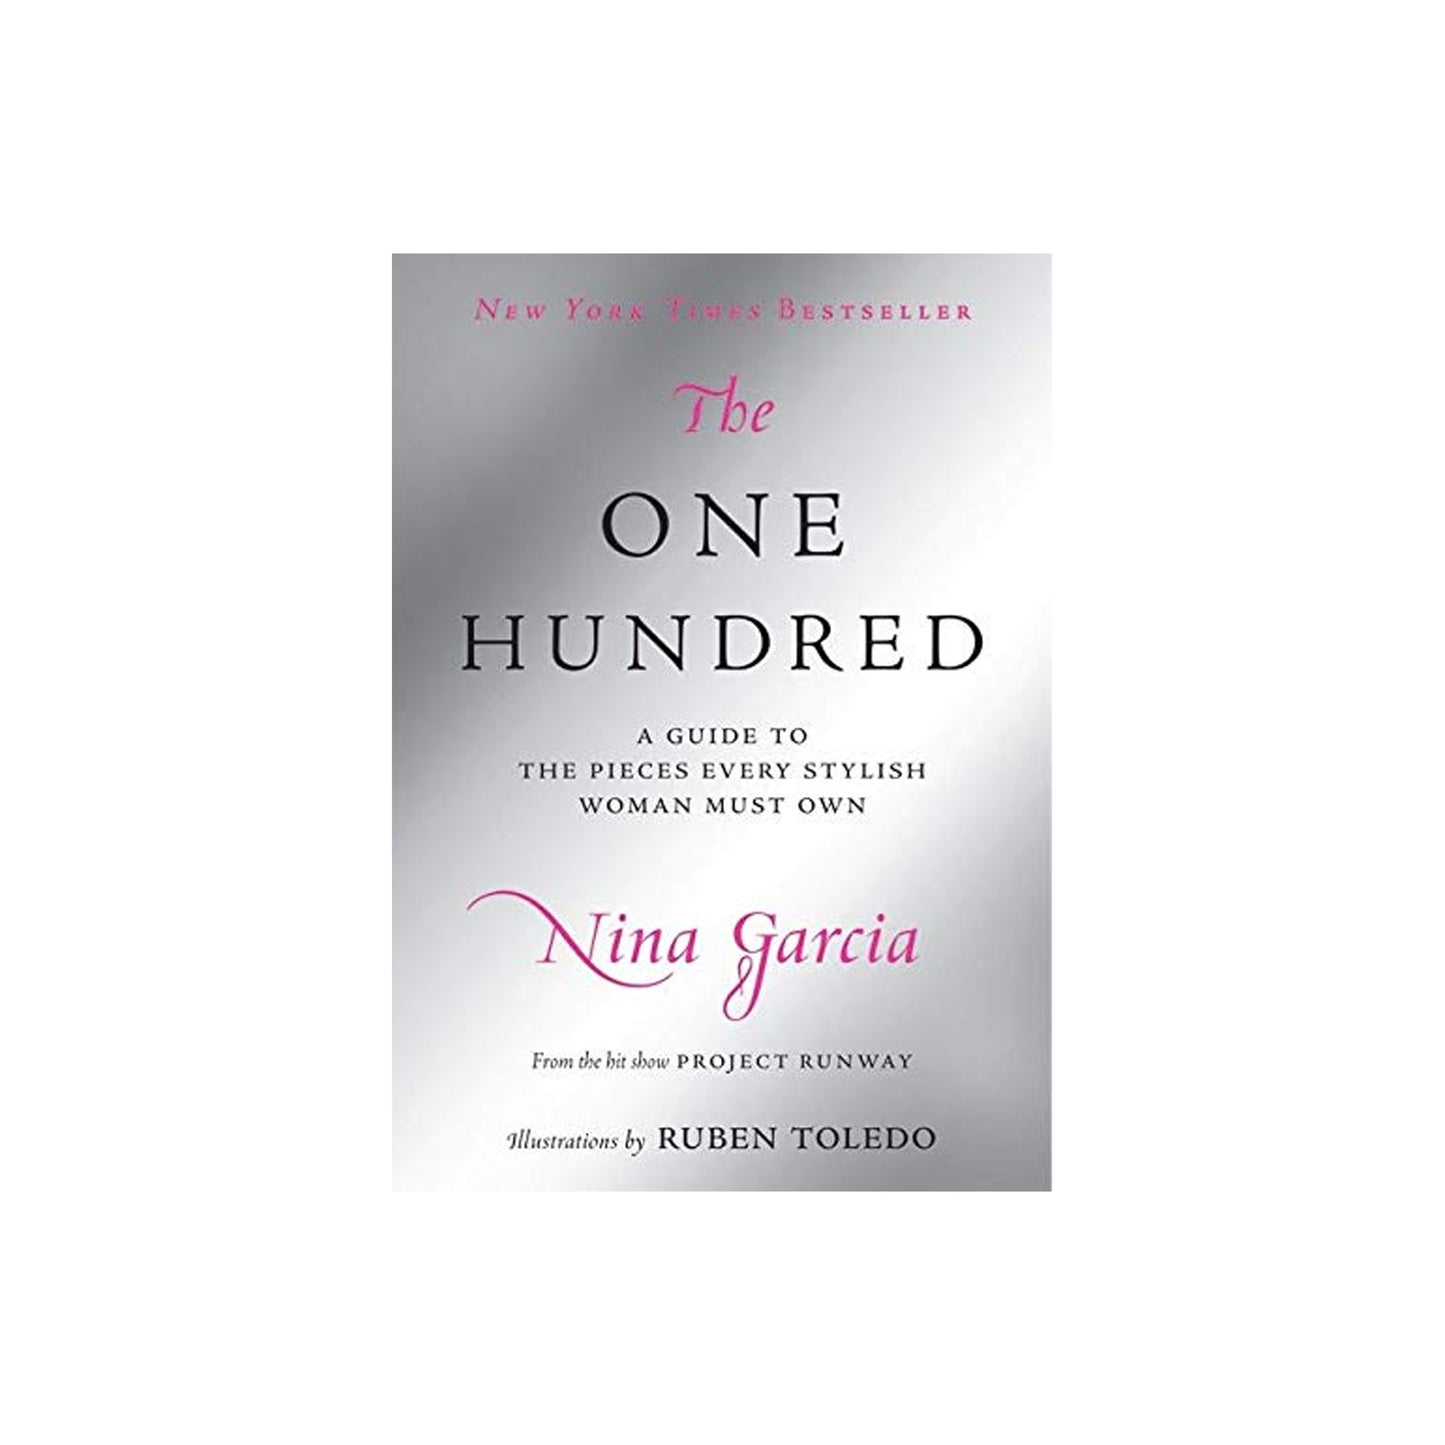 The One Hundred: A Guide to the Pieces Every Stylish Woman Must Own by Nina Garcia